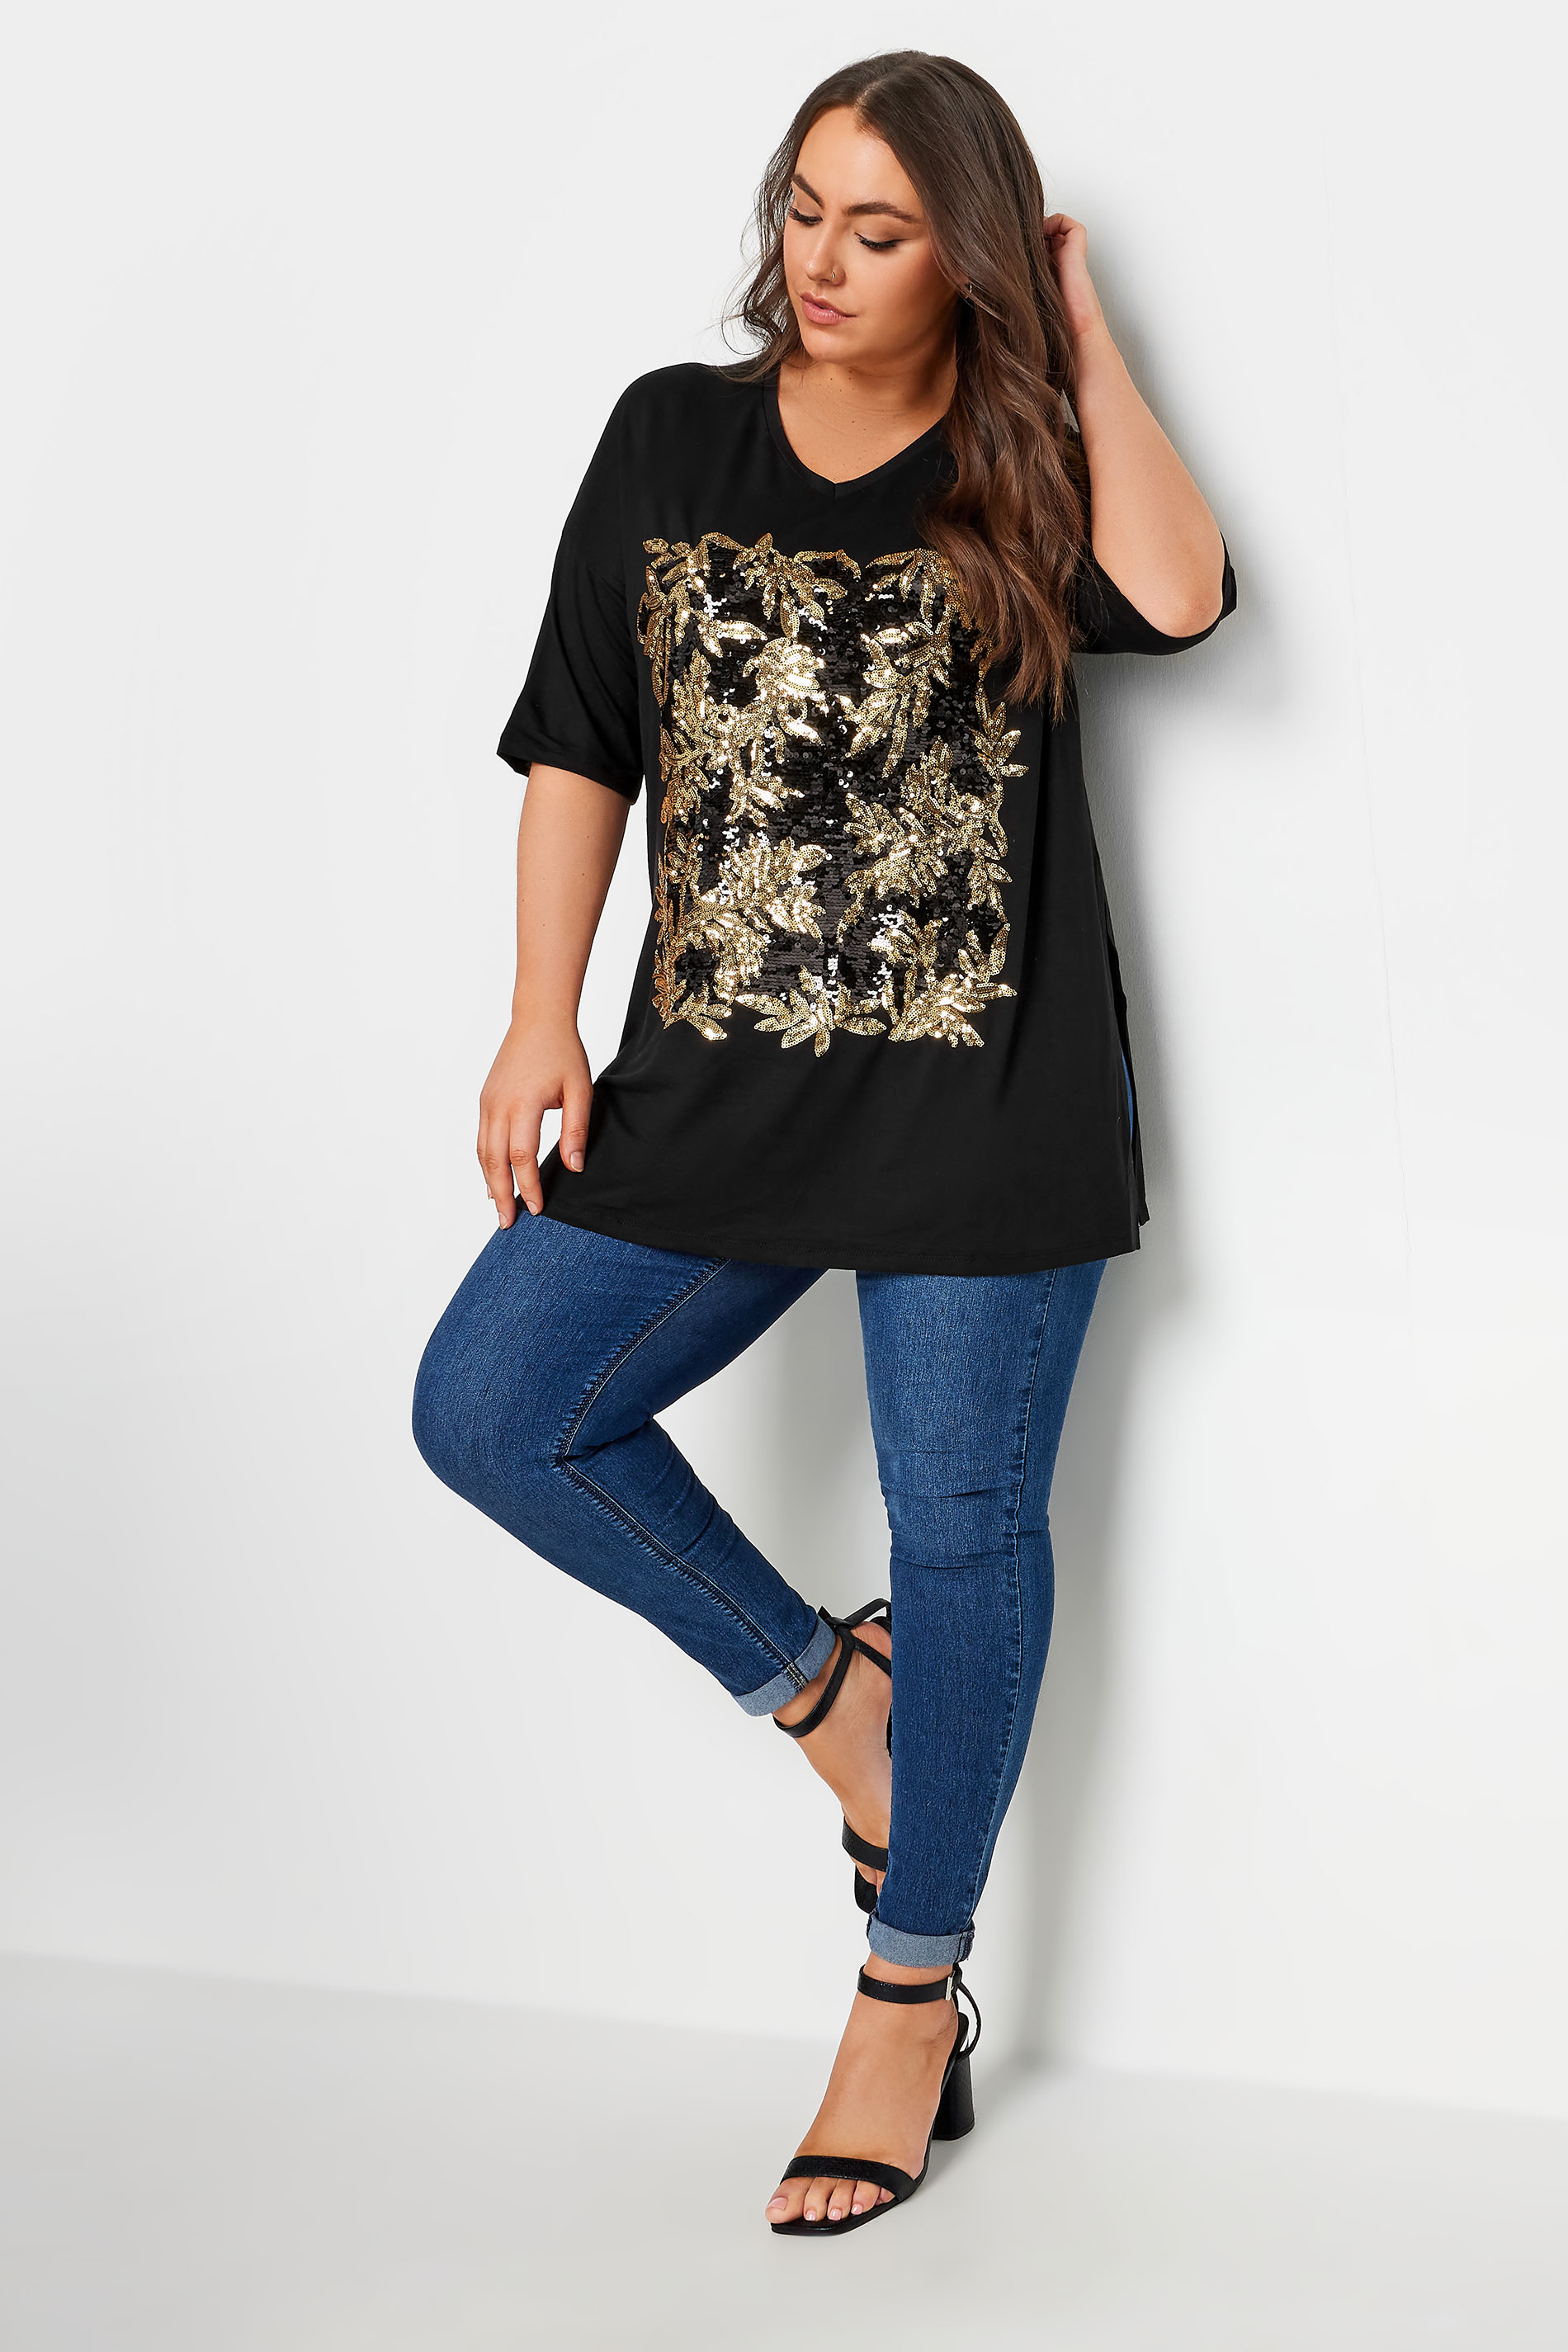 YOURS Plus Size Black Sequin Embellished Design T-Shirt | Yours Clothing 2